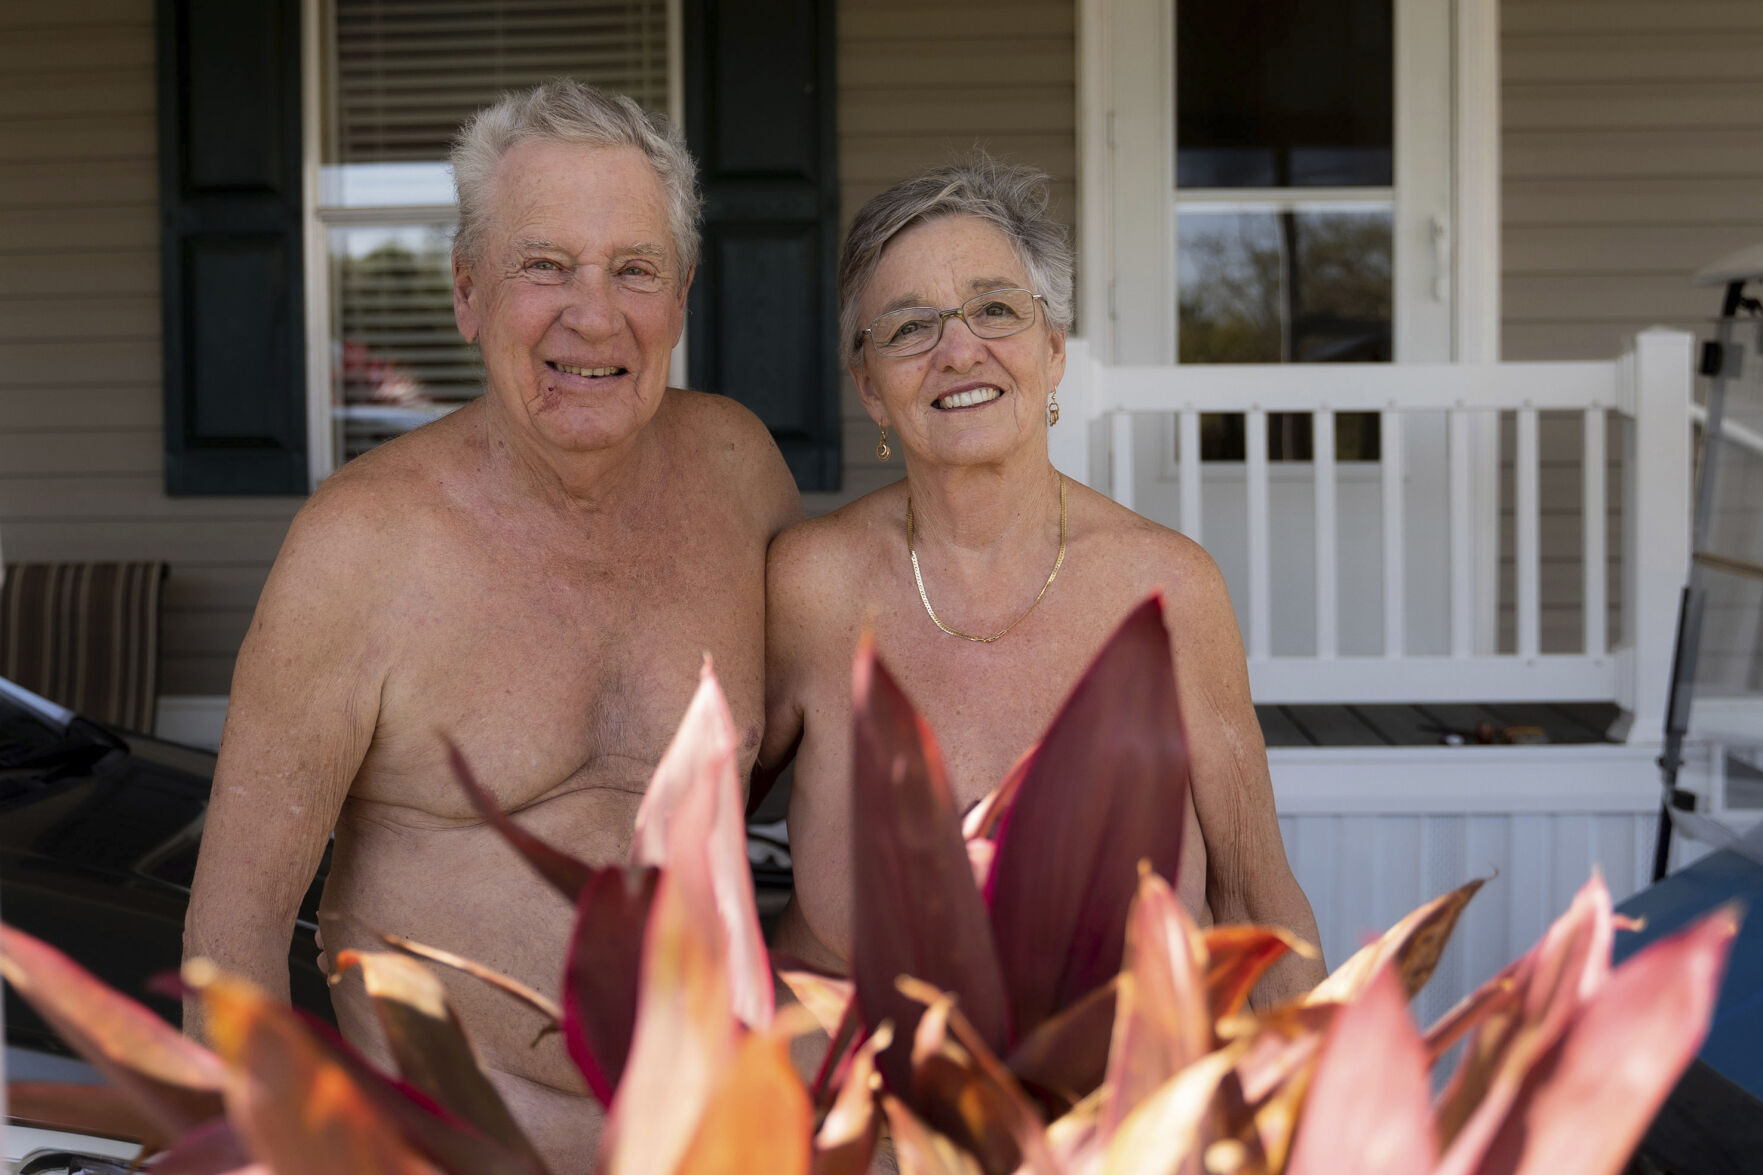 Christians strip down at a South Texas nudist community Lifestyle fredericknewspost picture image